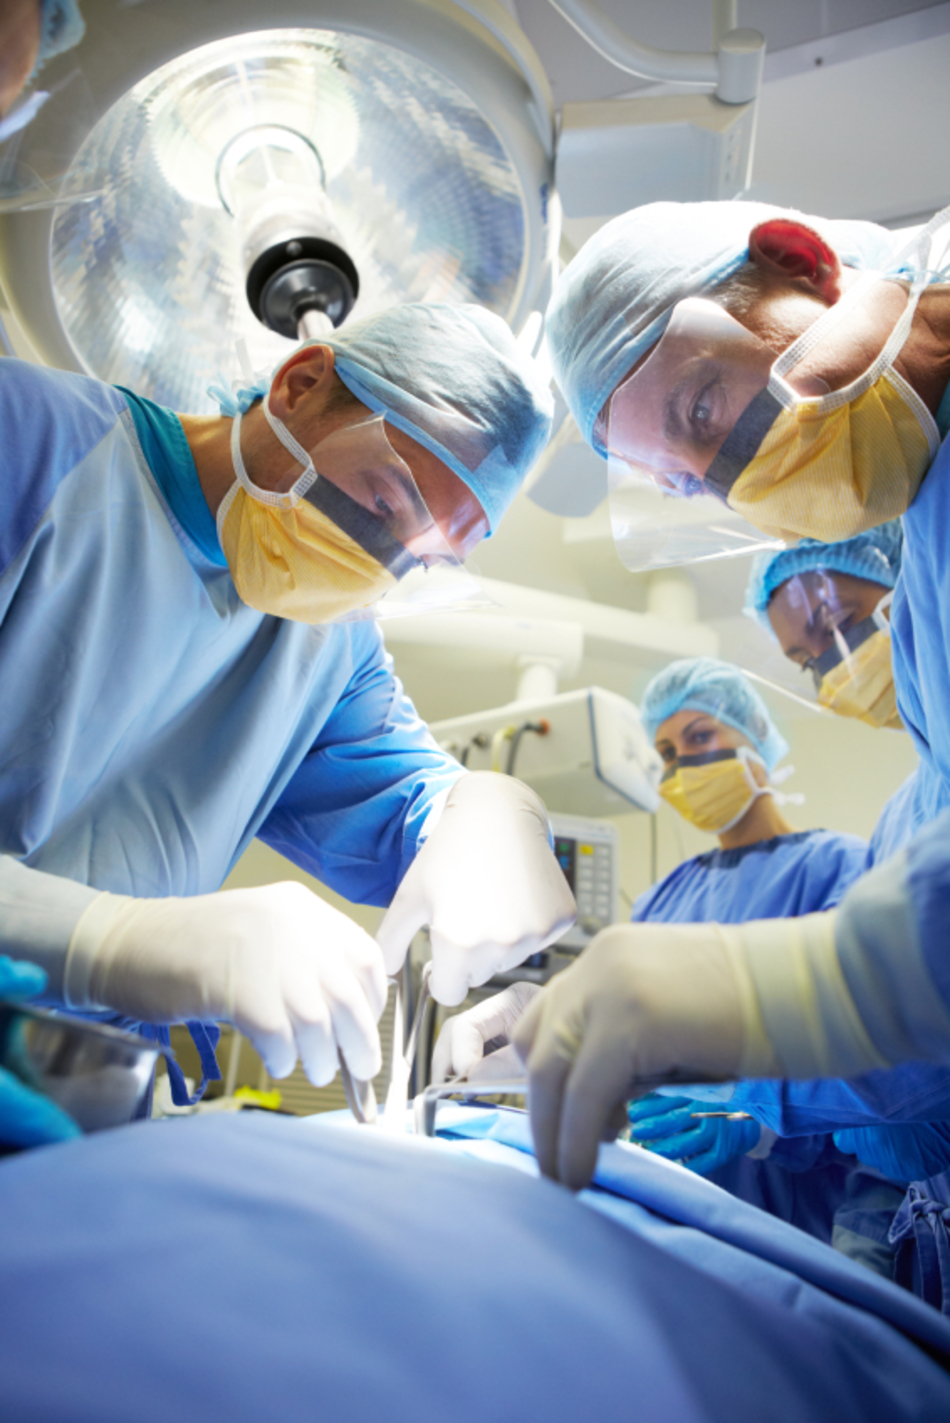 Fighting Infection in the OR